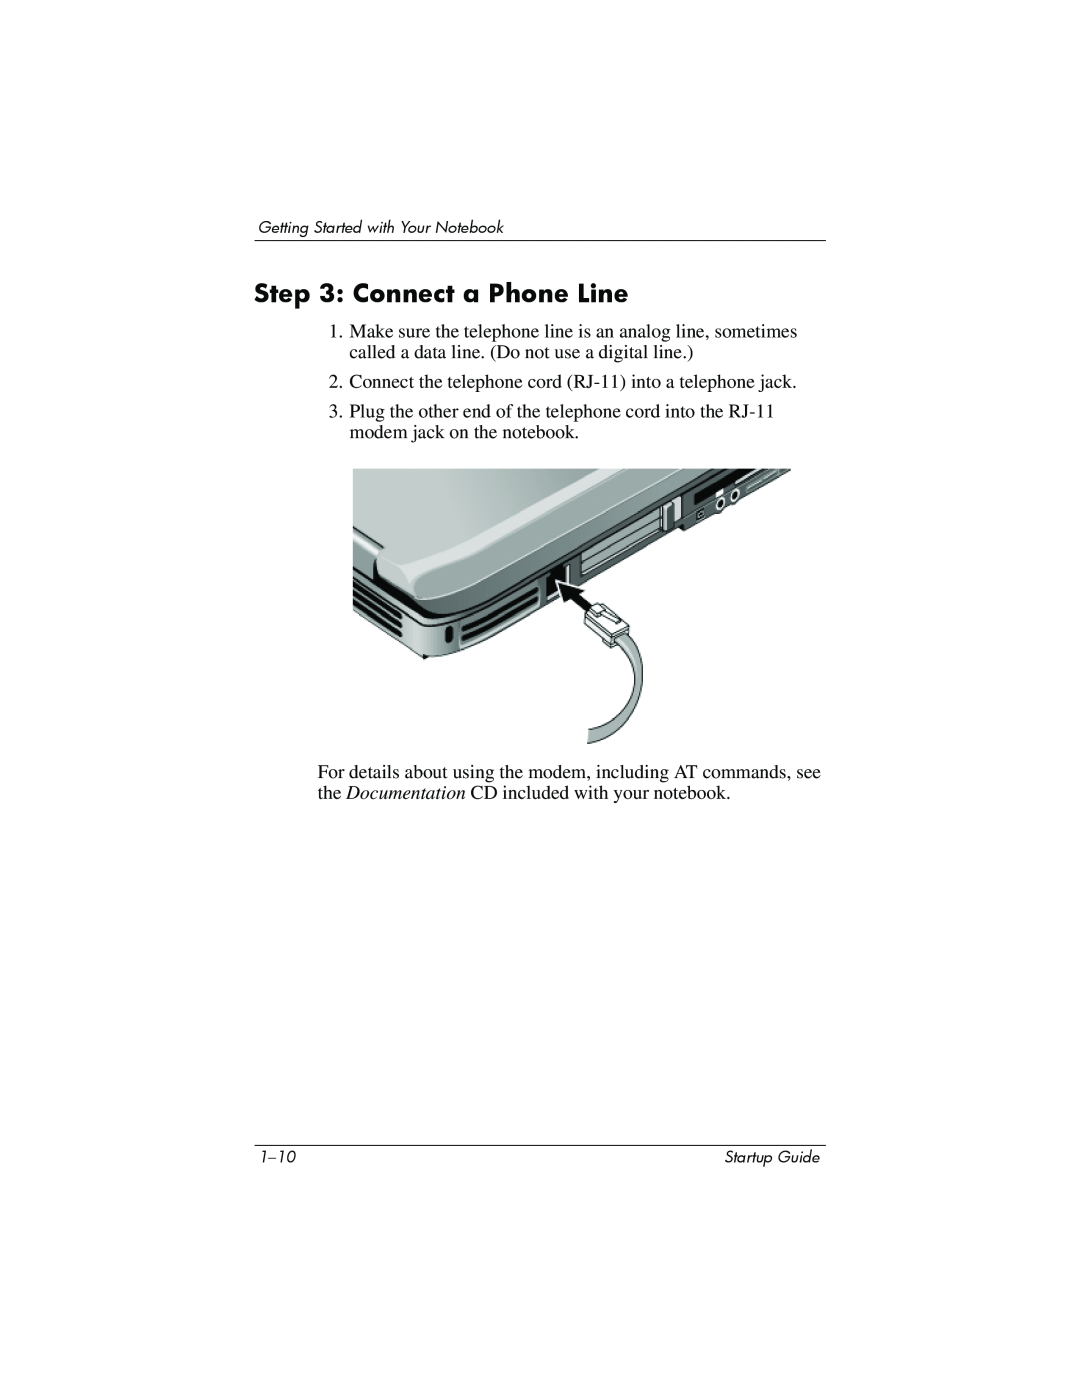 Compaq Personal Computer manual Connect a Phone Line 